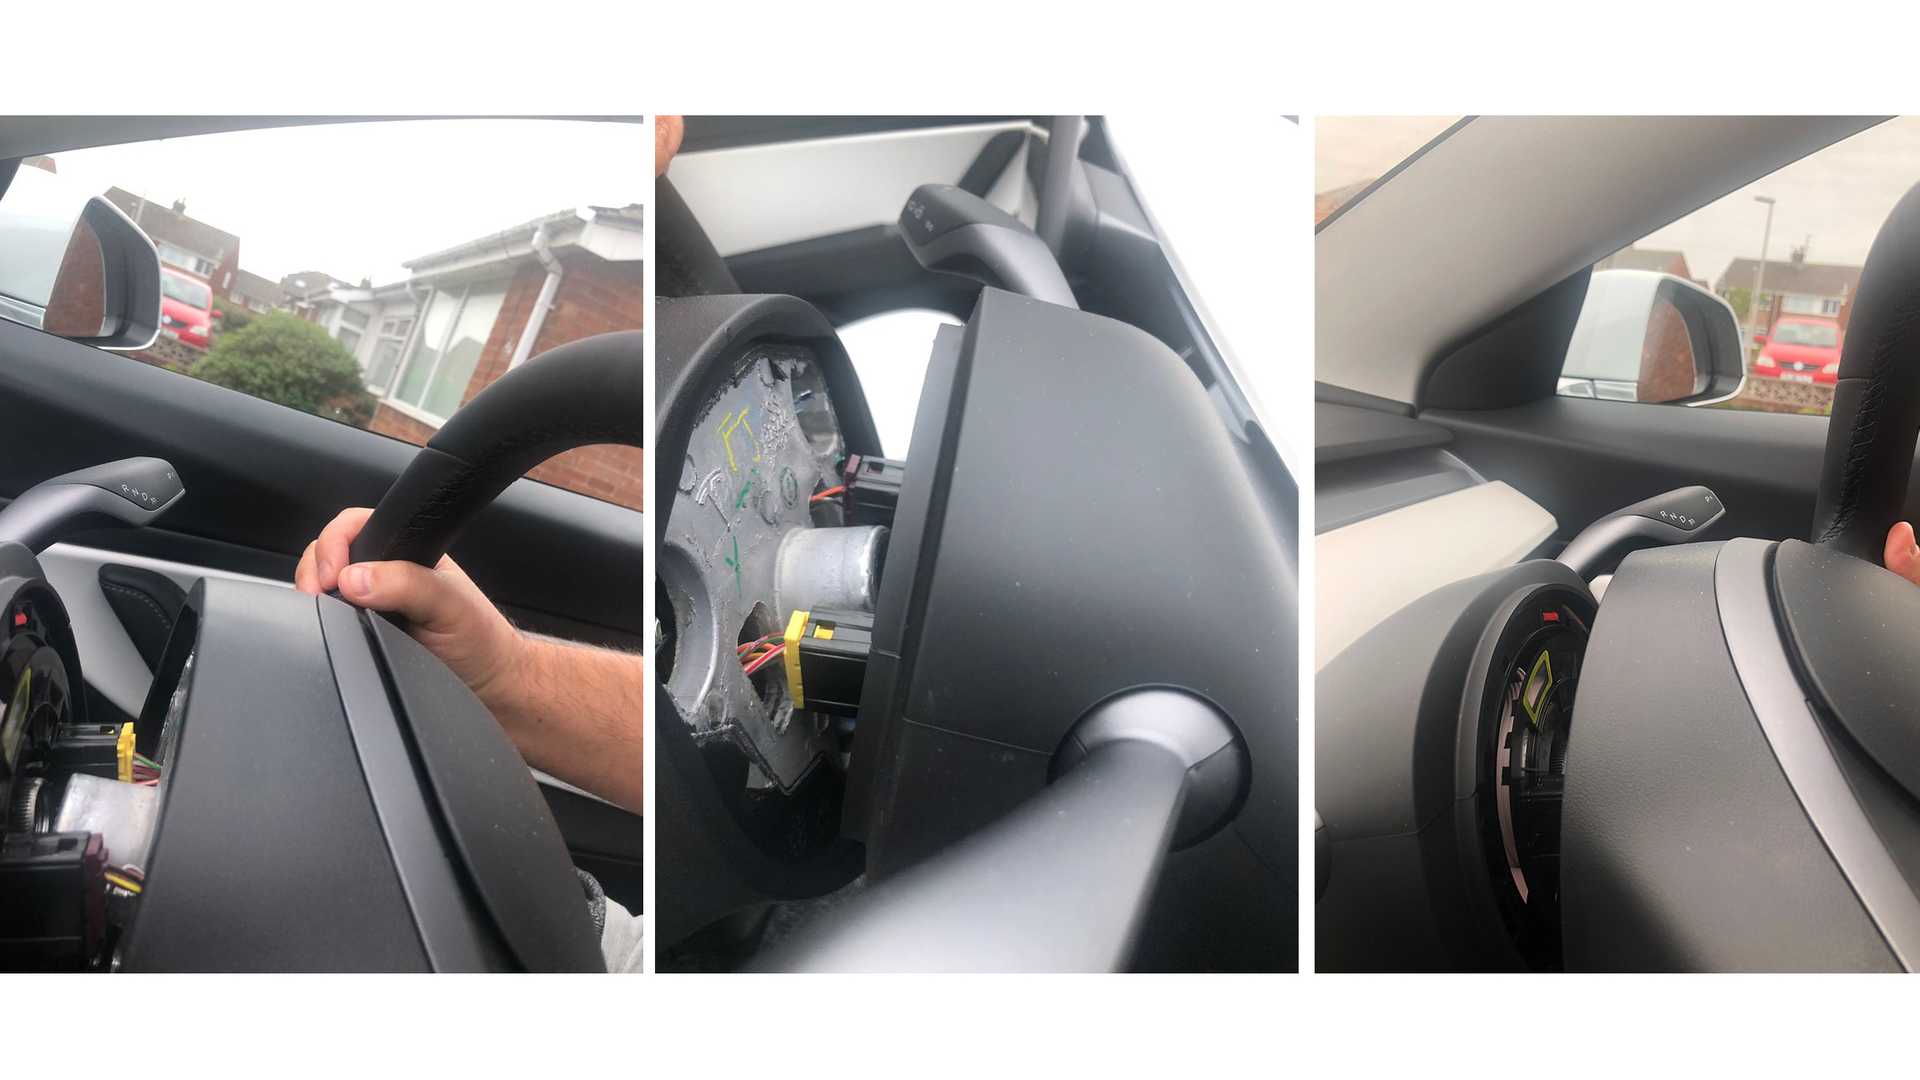 Safety Concerns Raised As Tesla Steering Wheels Fall Off Mid-Drive